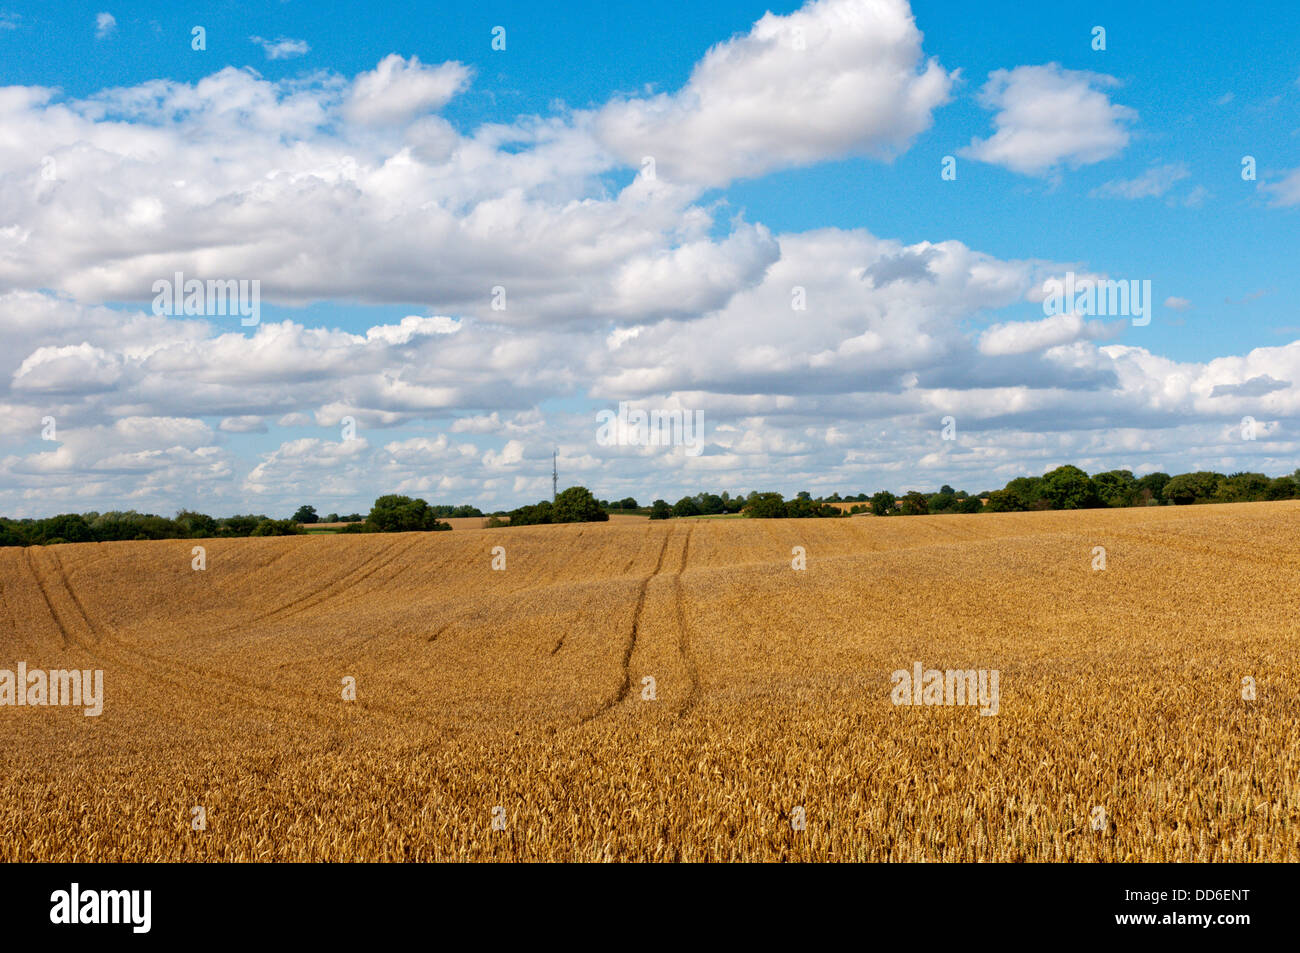 A field of cereals growing in typical Essex farming country outside Braintreee. Stock Photo